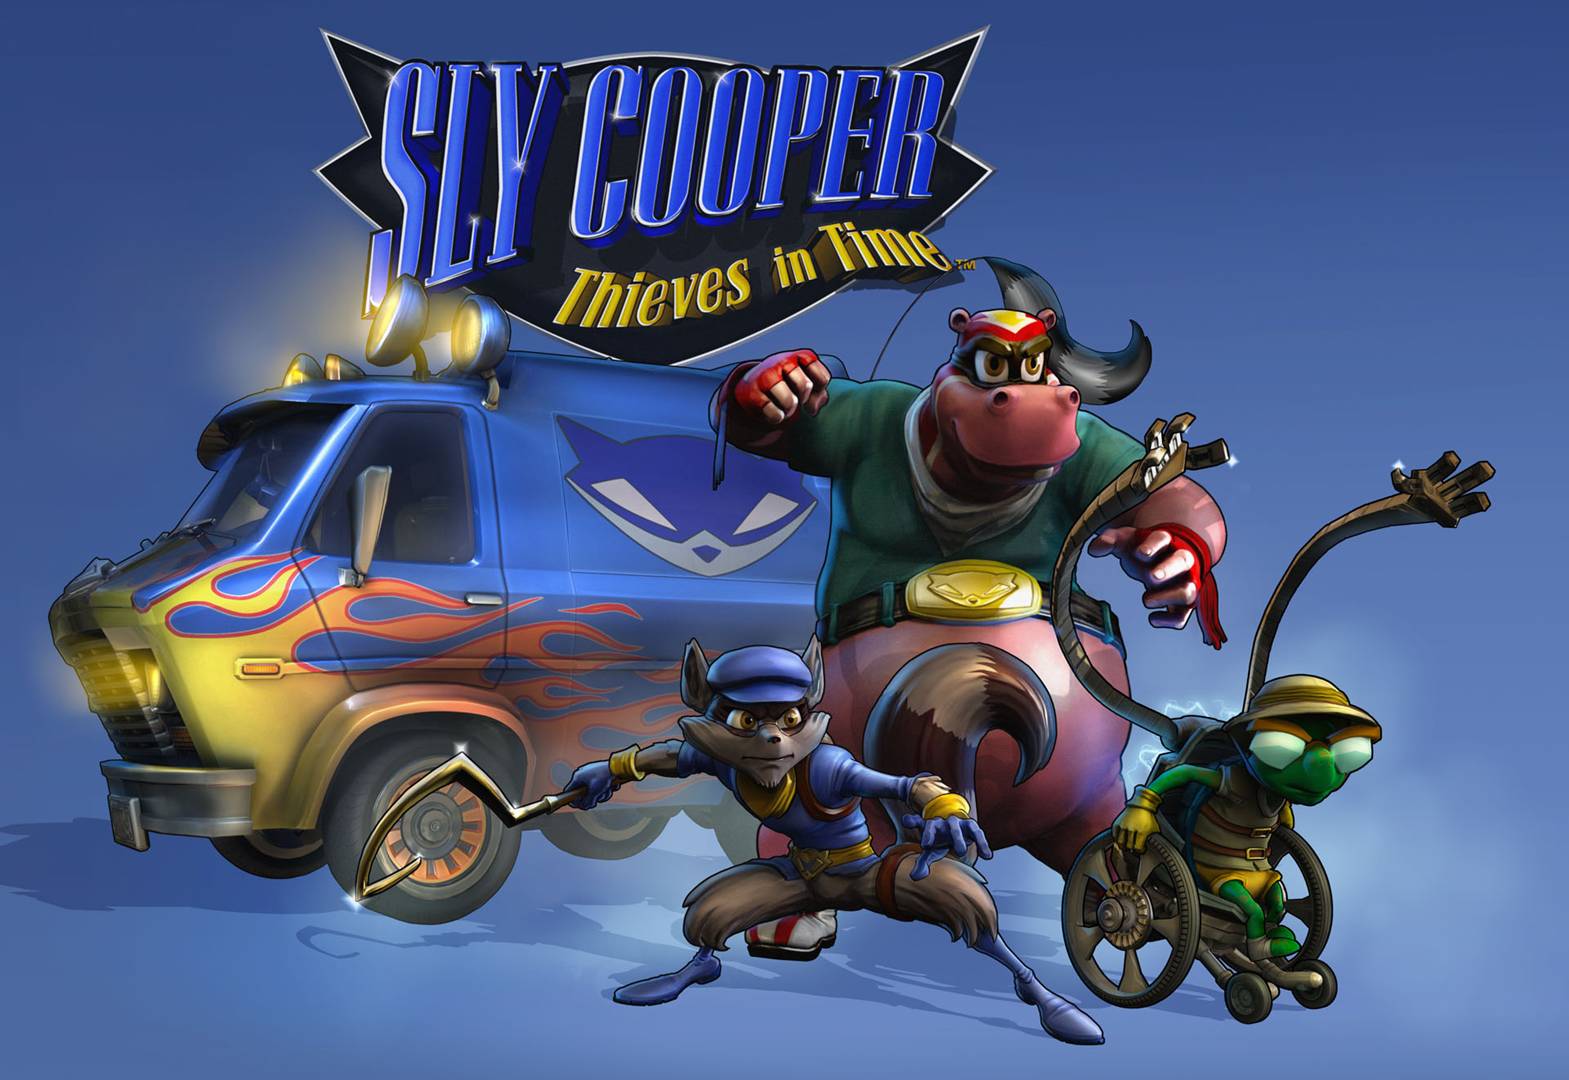 Sly Cooper Thieves in Time hd wallpapers « GamingBolt: Video